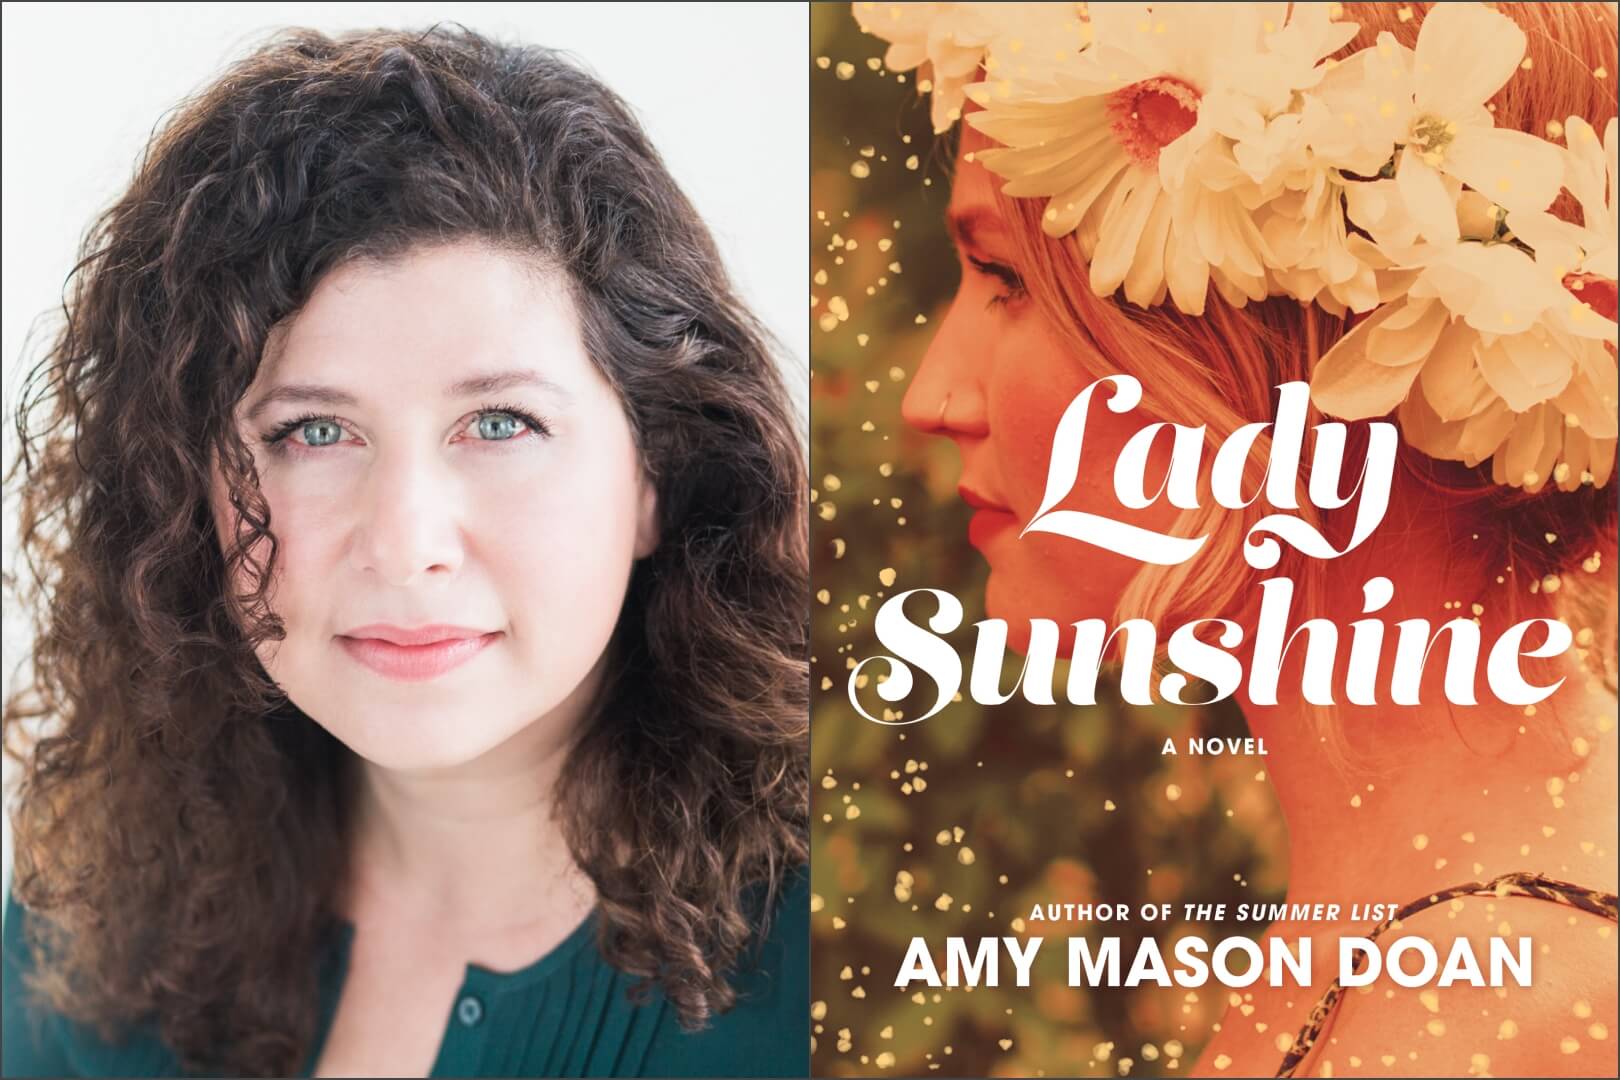 Interview with Amy Mason Doan, Author of Lady Sunshine